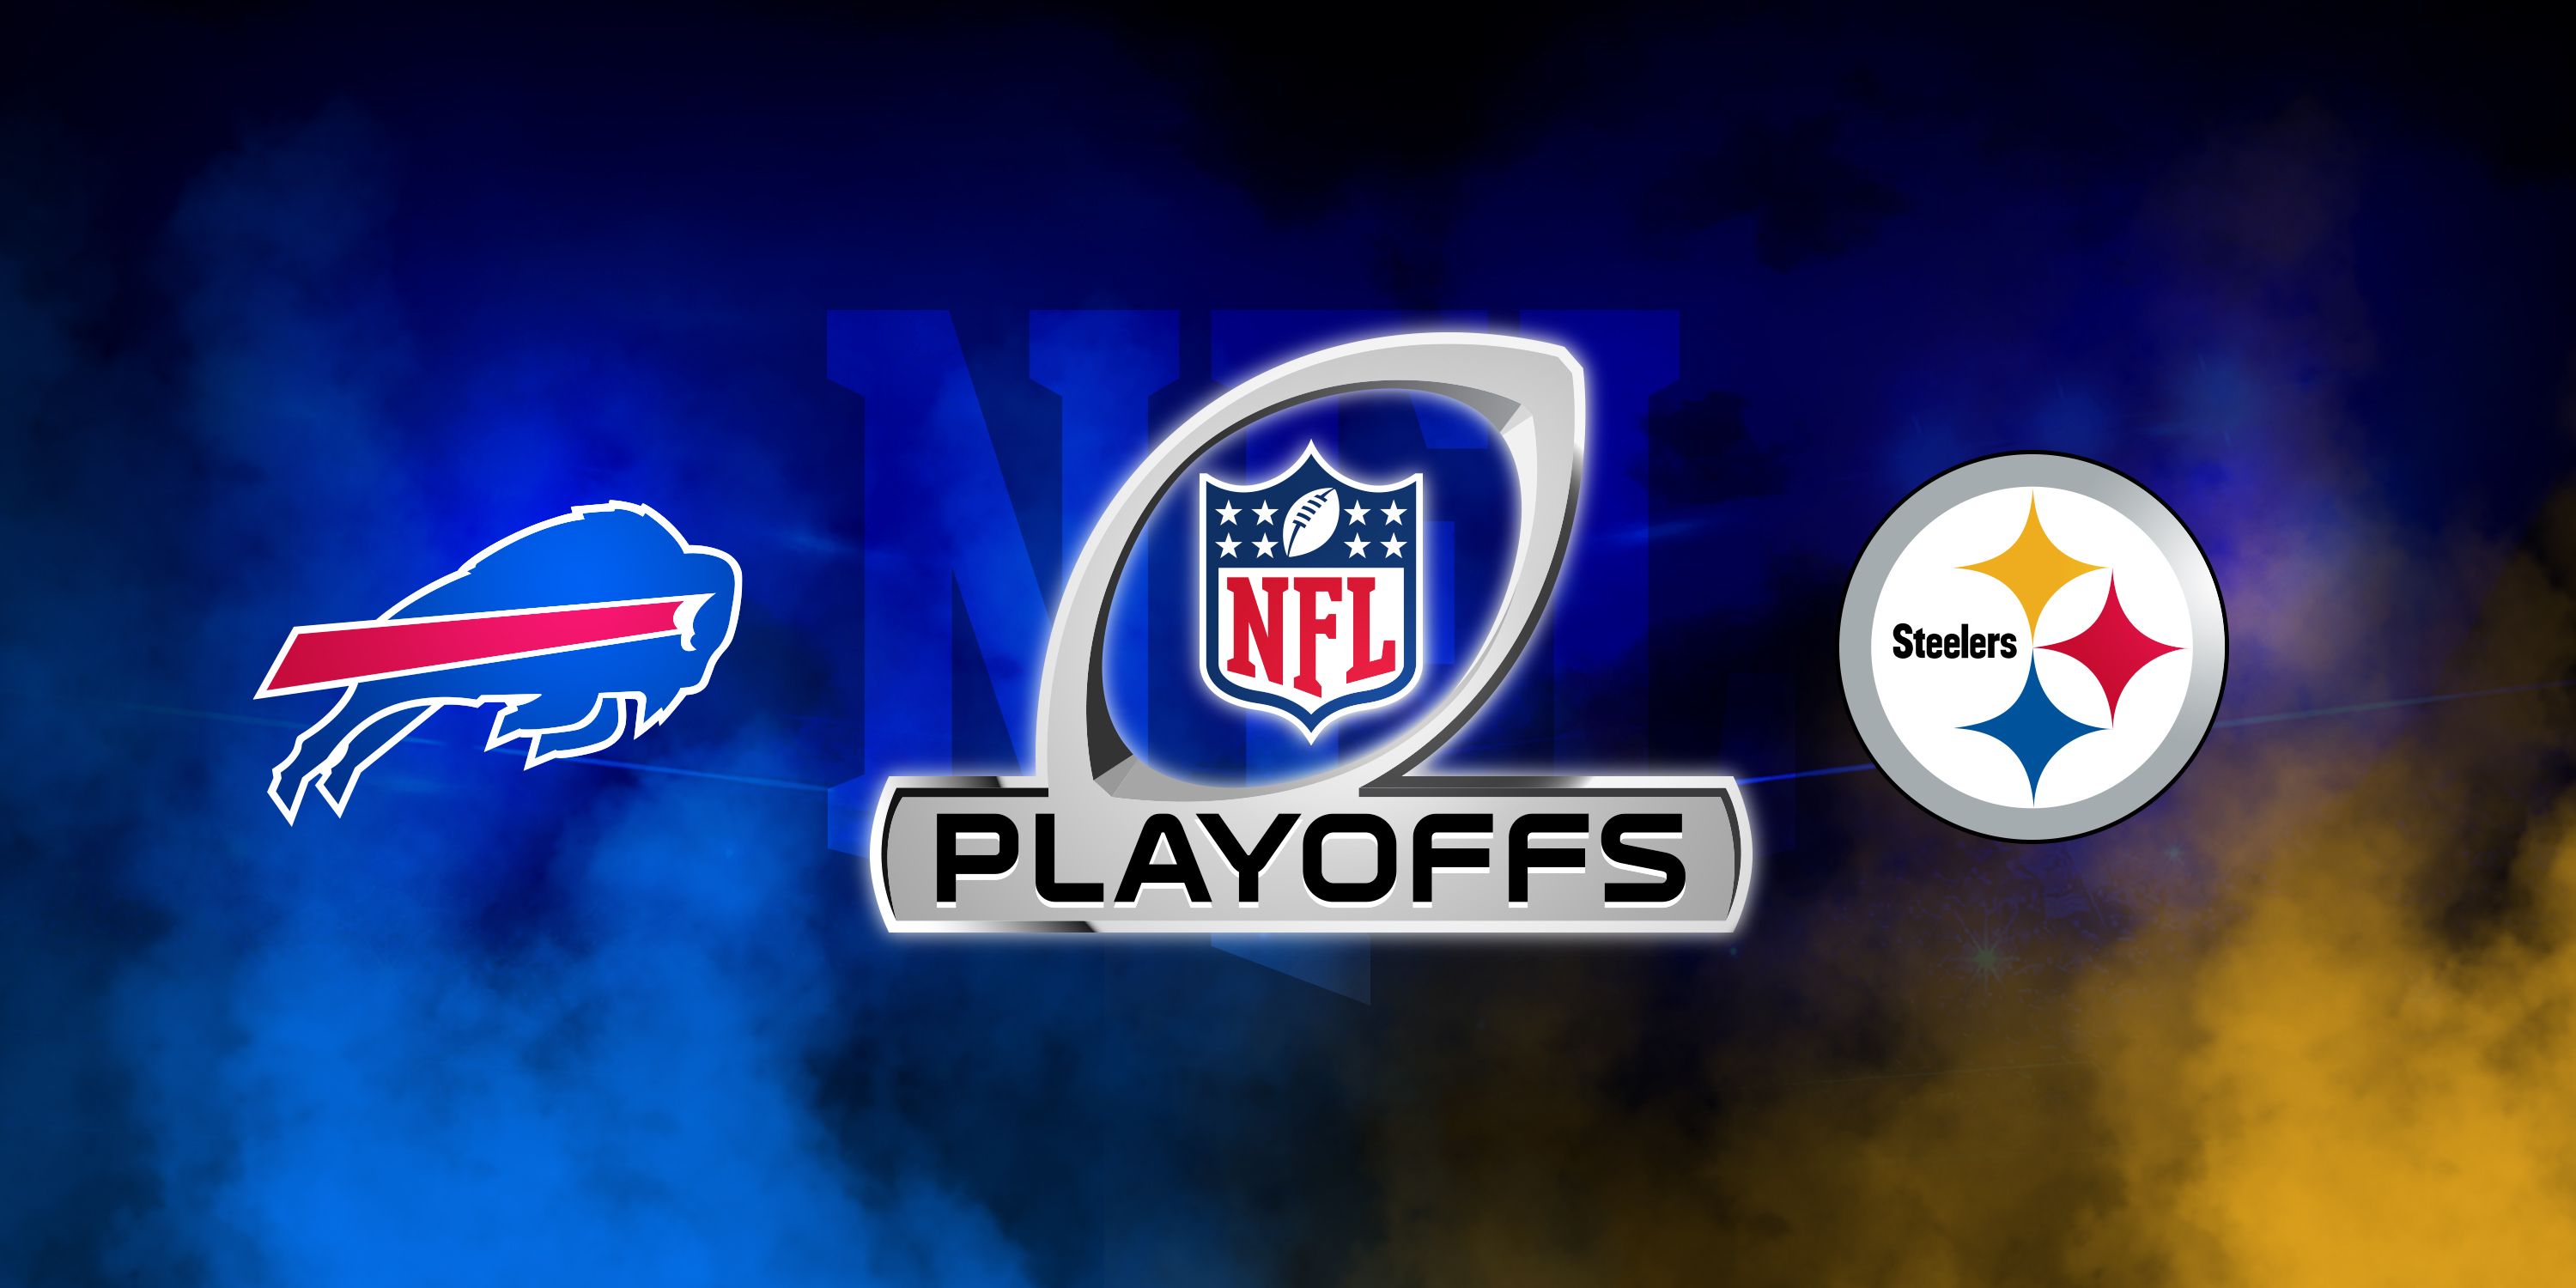 Bills vs. Steelers Preview, Key Matchups, Betting Odds and Injury Reports